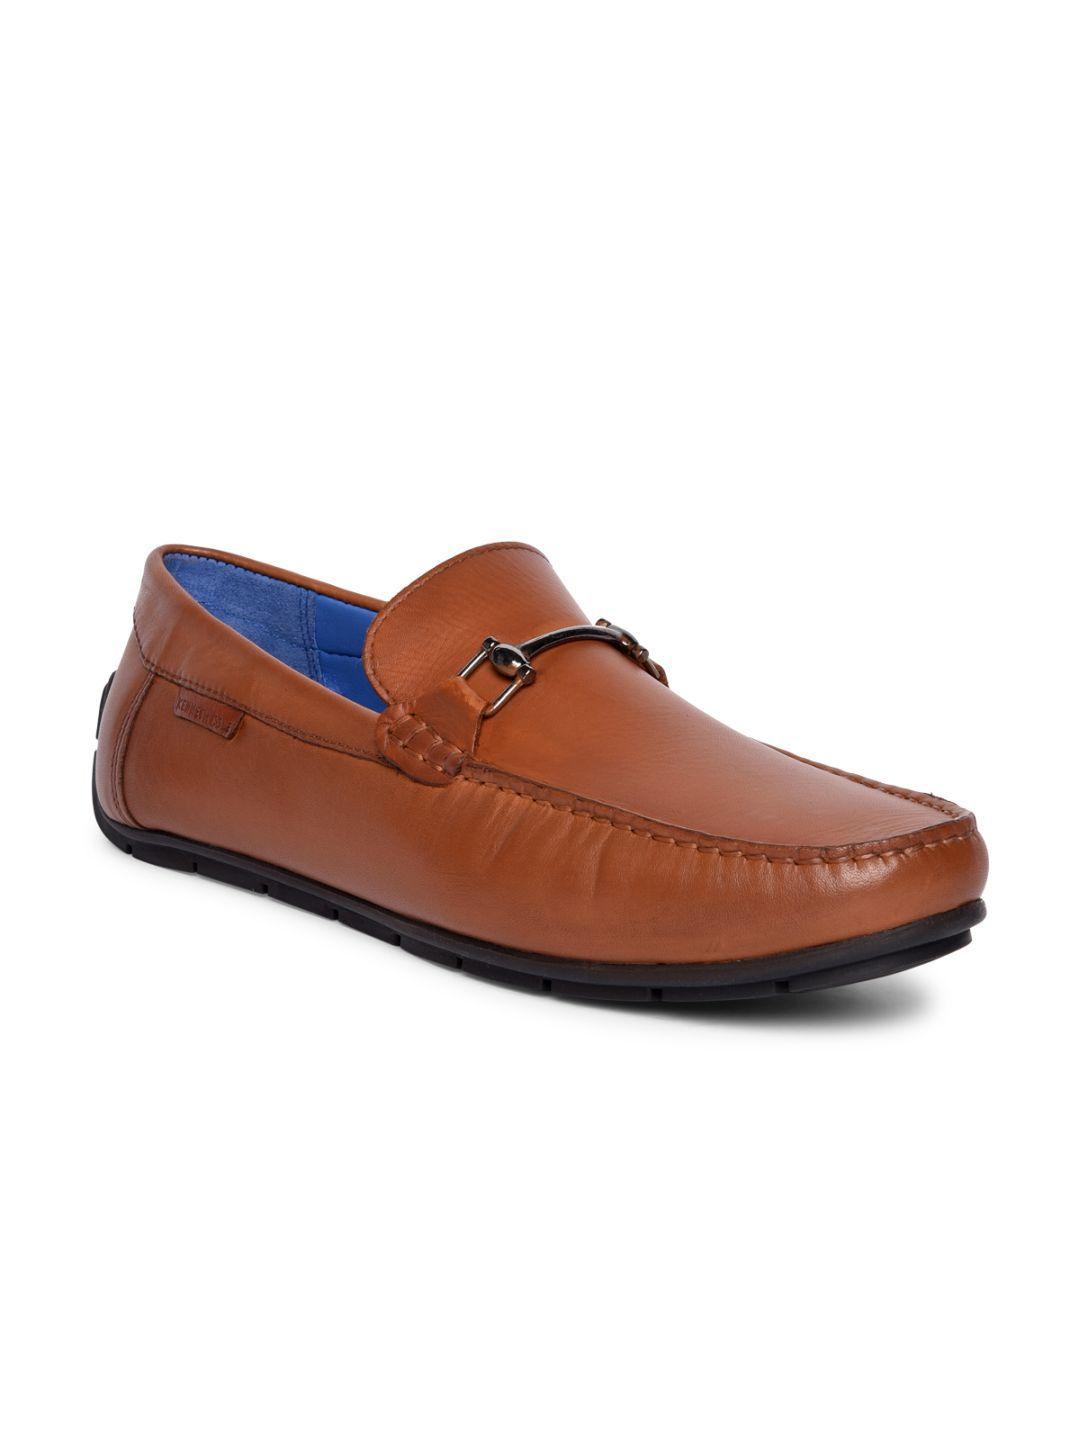 kenneth-cole-men-tan-brown-leather-loafers